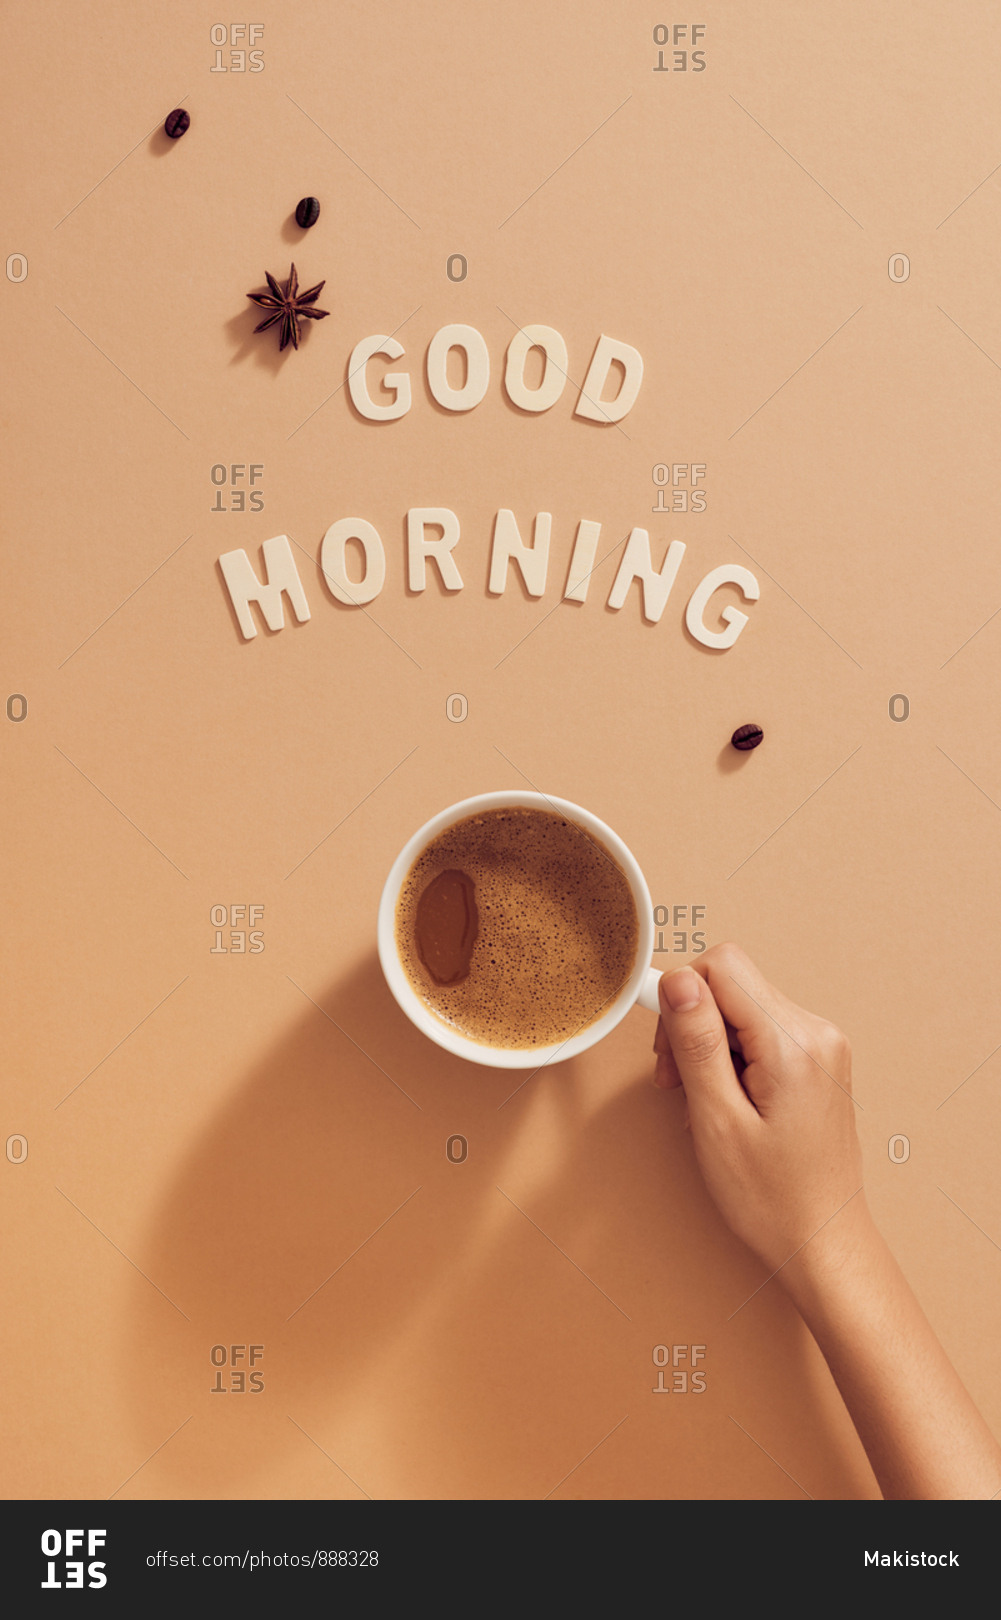 good morning images with coffee cup